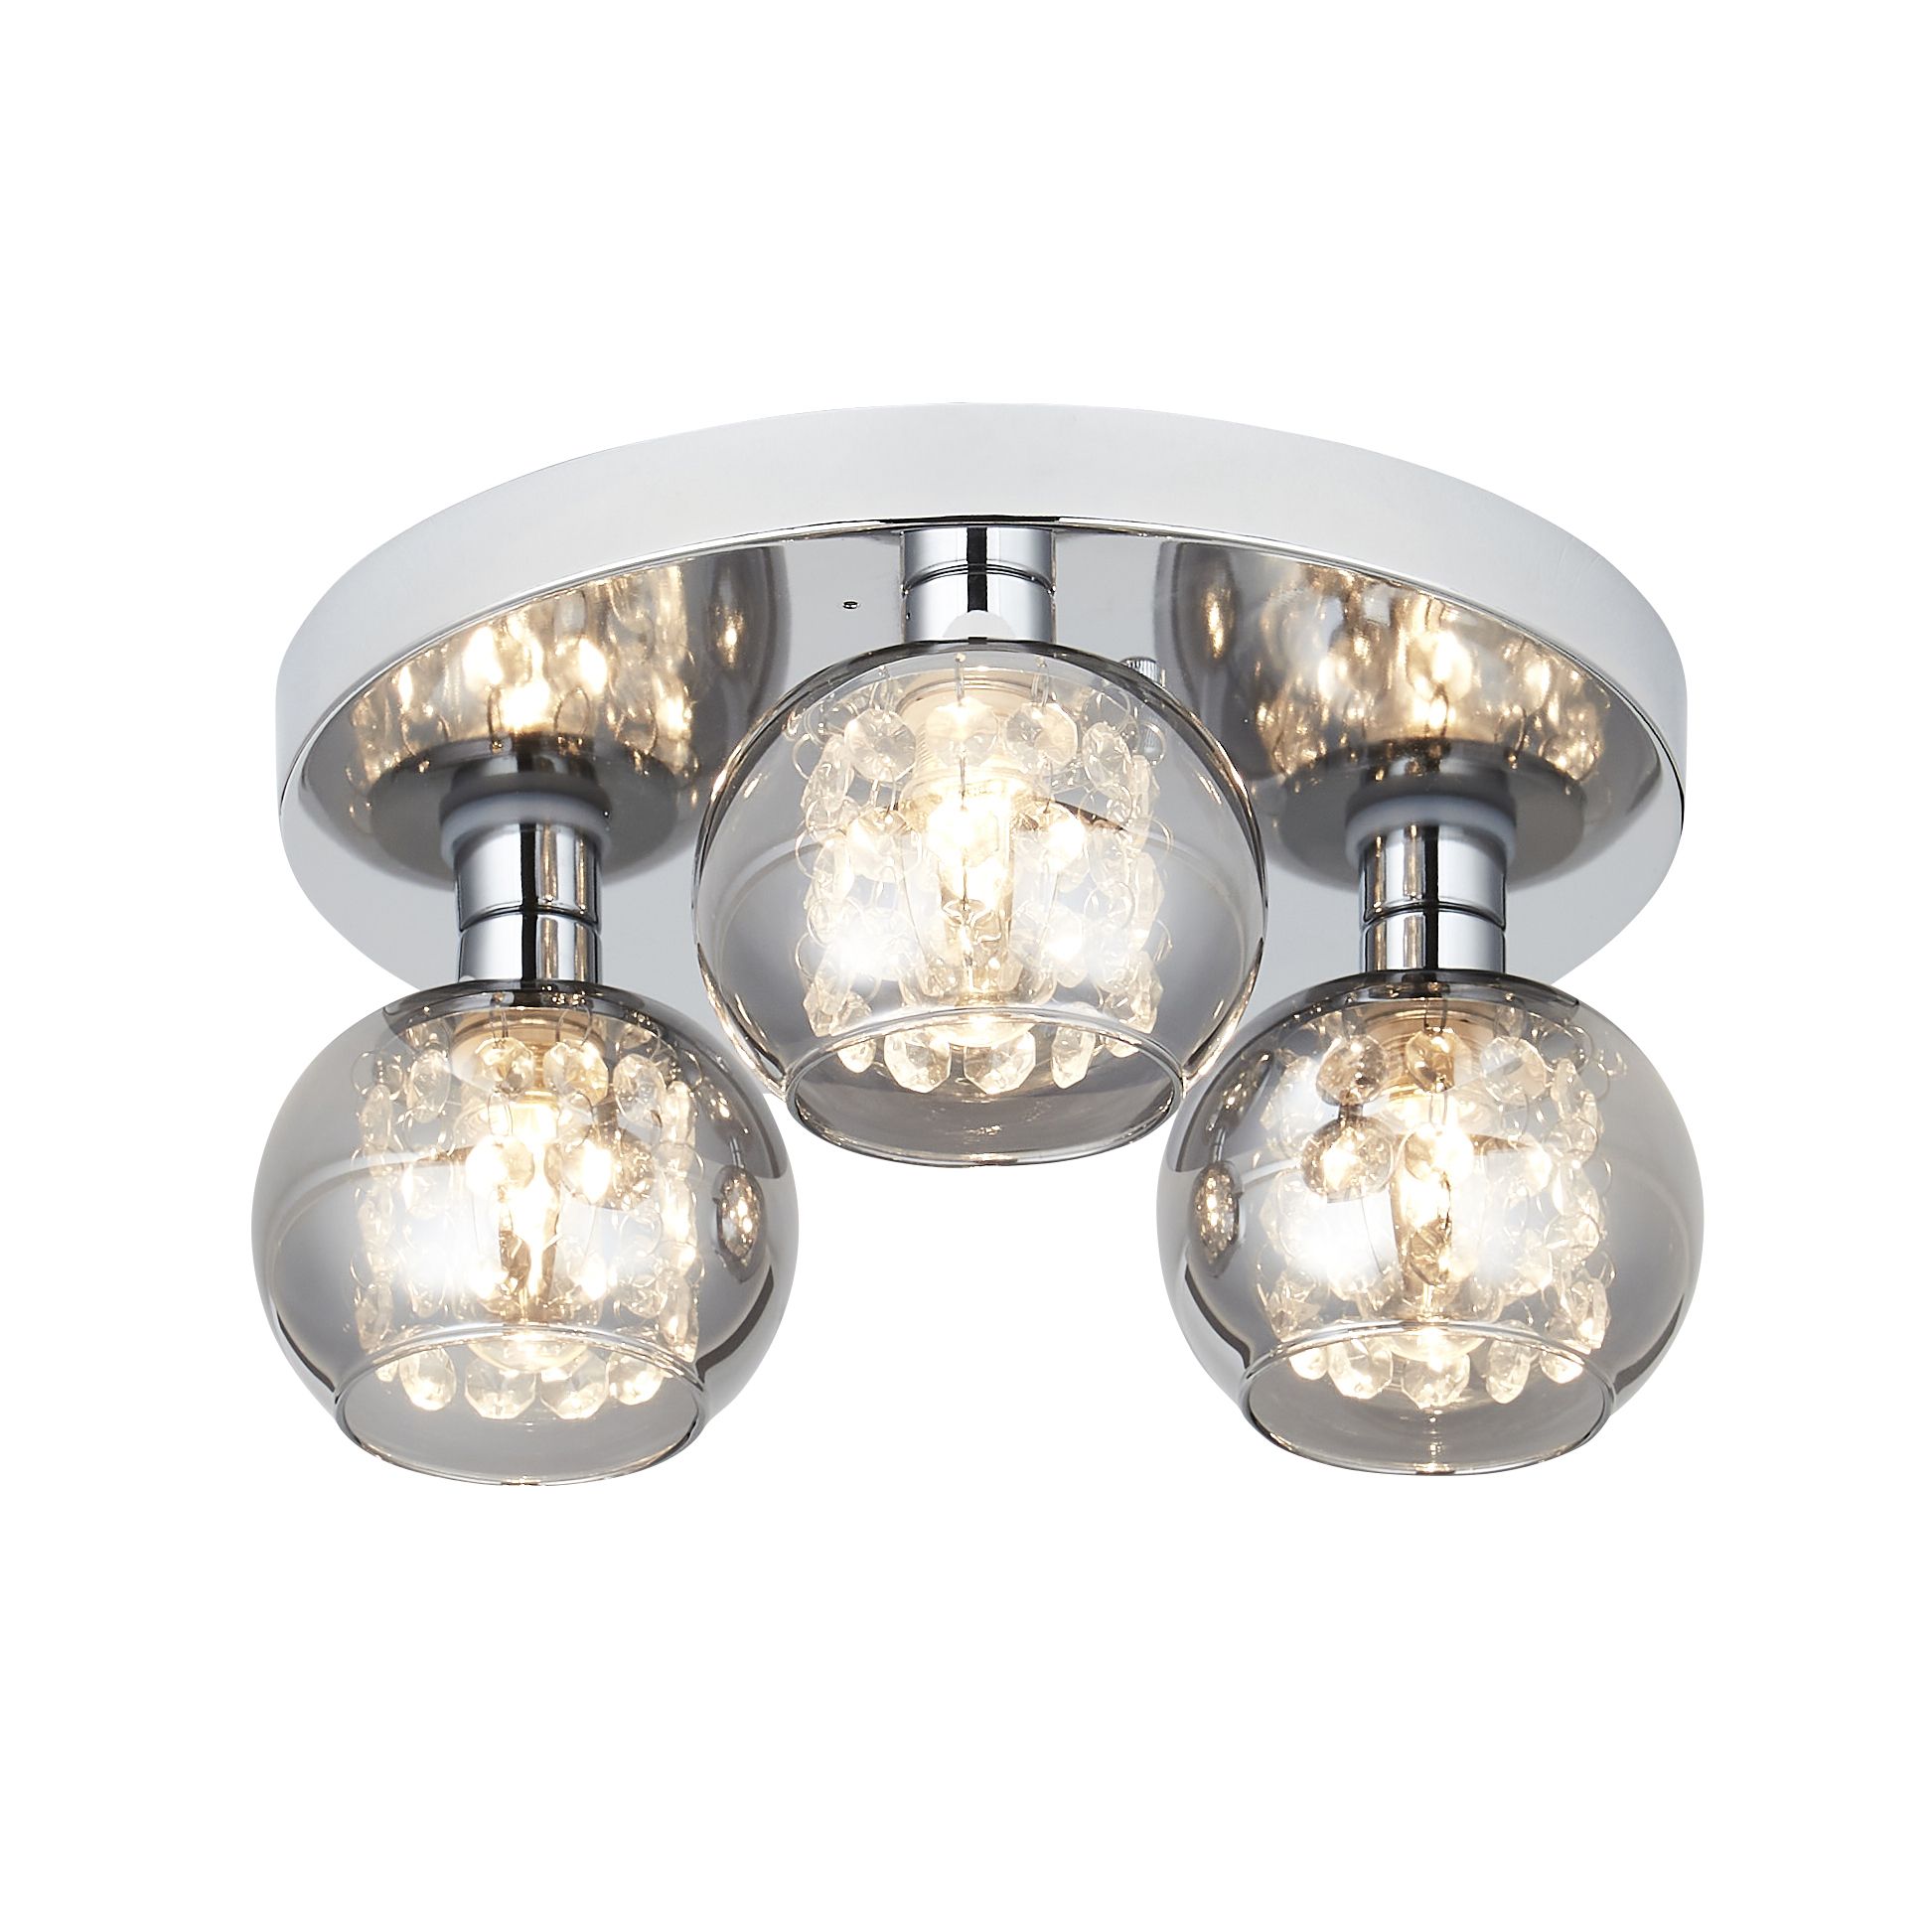 Inlight Guava Beaded Glass & steel Chrome & smoked glass effect 3 Lamp Bathroom LED Ceiling light